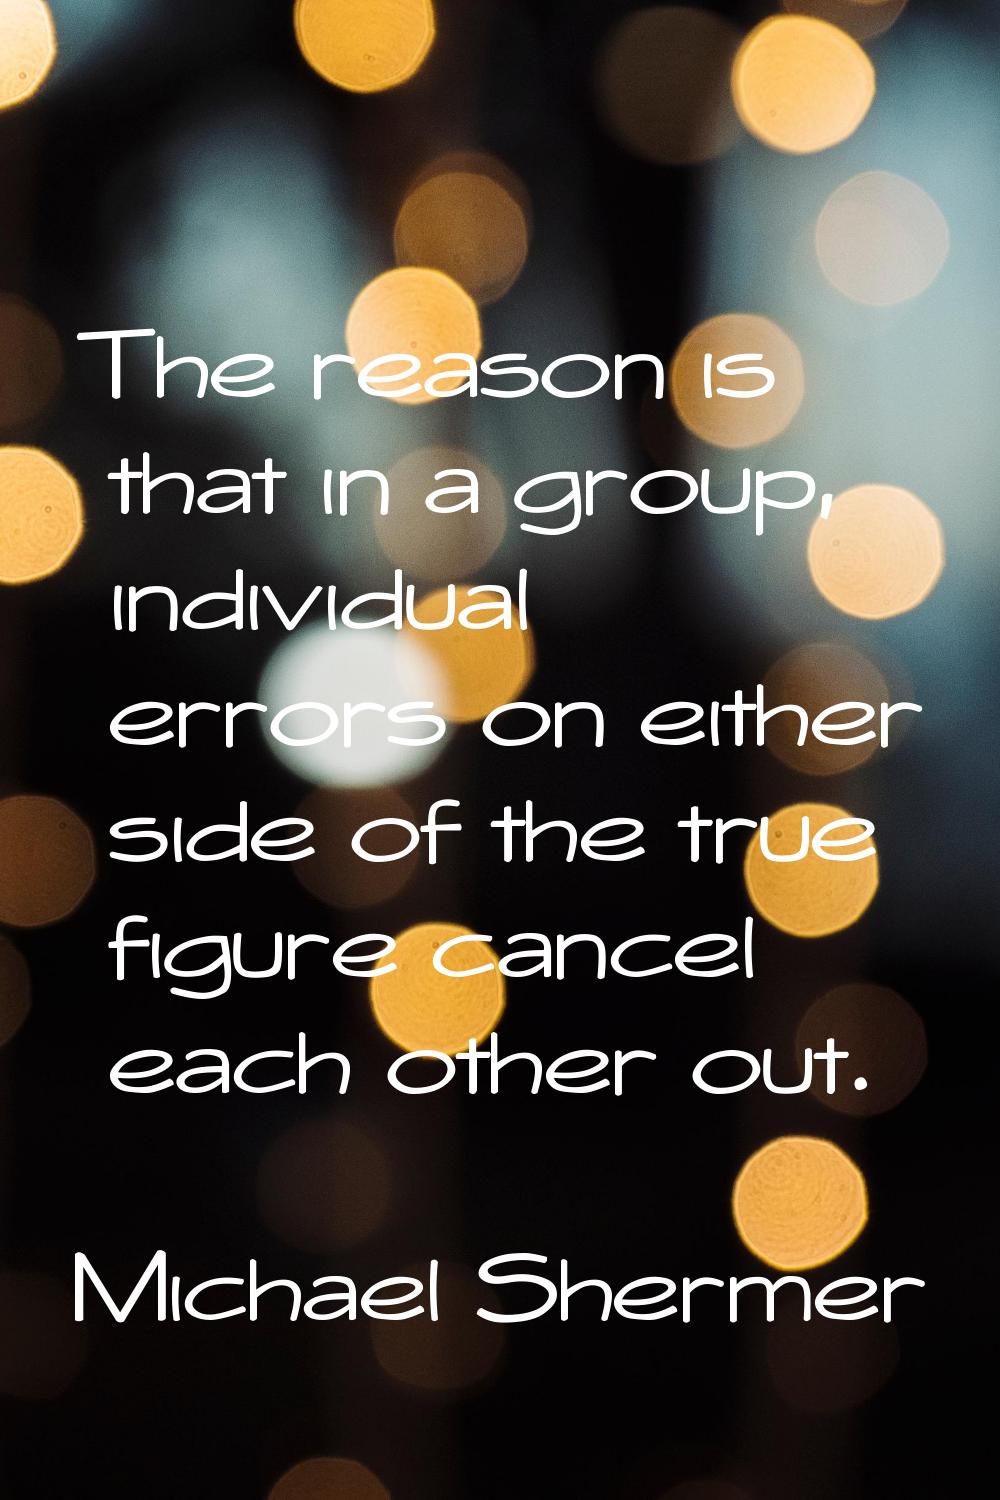 The reason is that in a group, individual errors on either side of the true figure cancel each othe